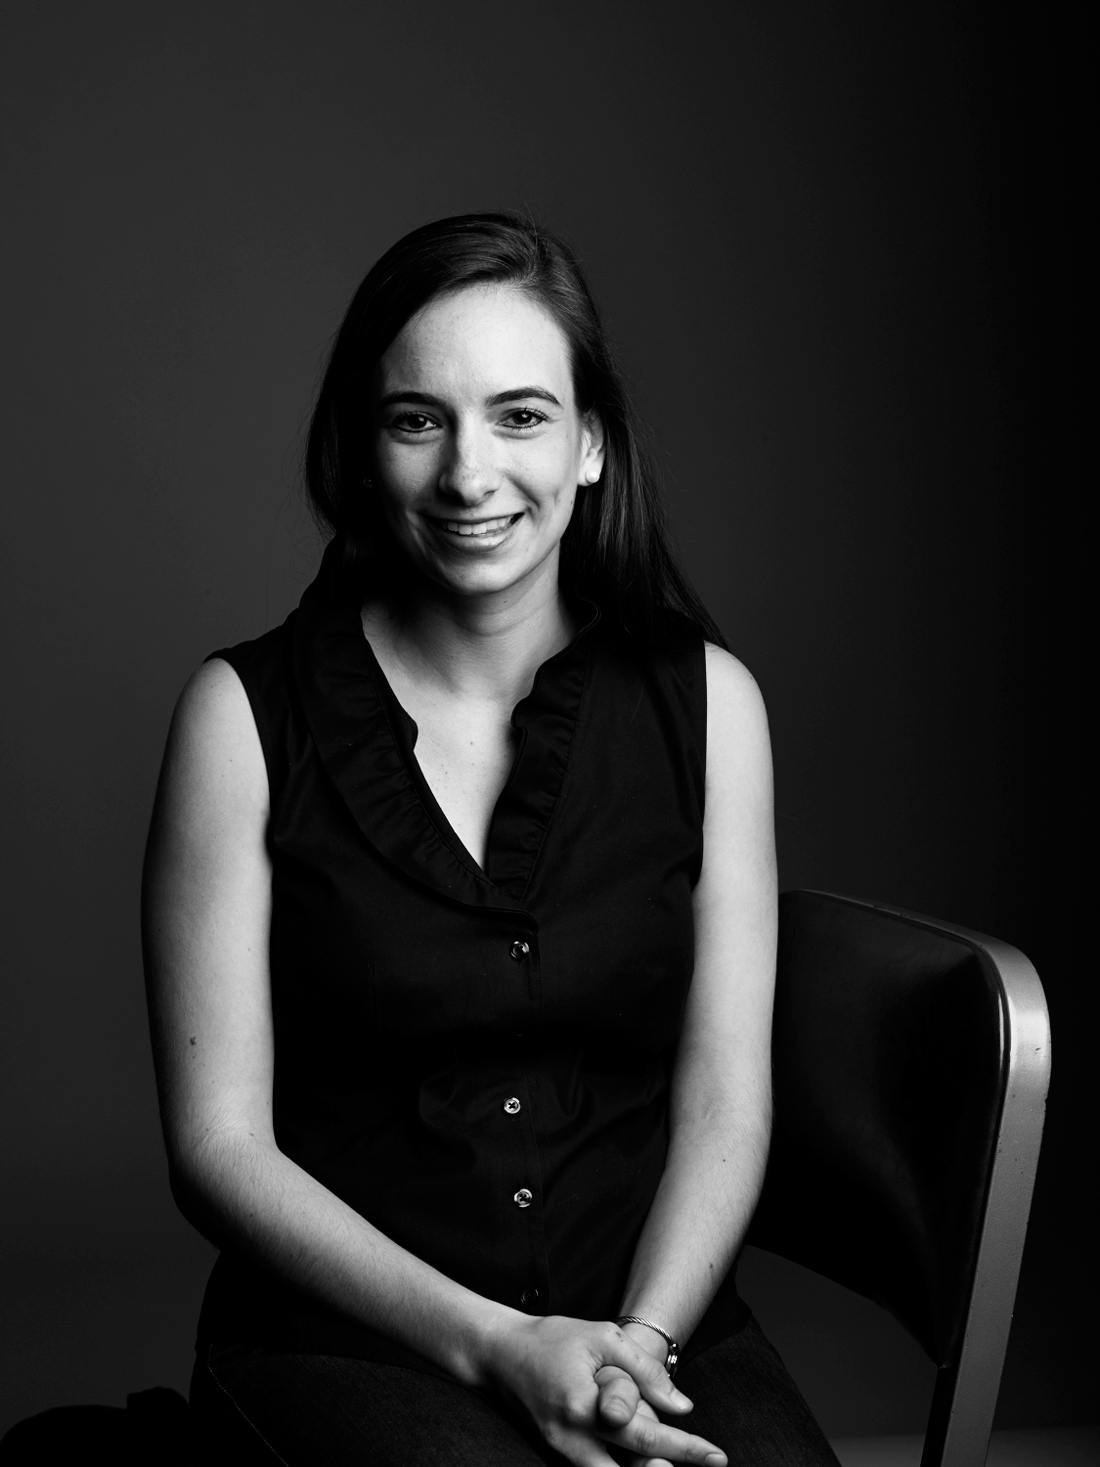 Natalya Brikner is the 29-year-old CEO of Accion Systems.